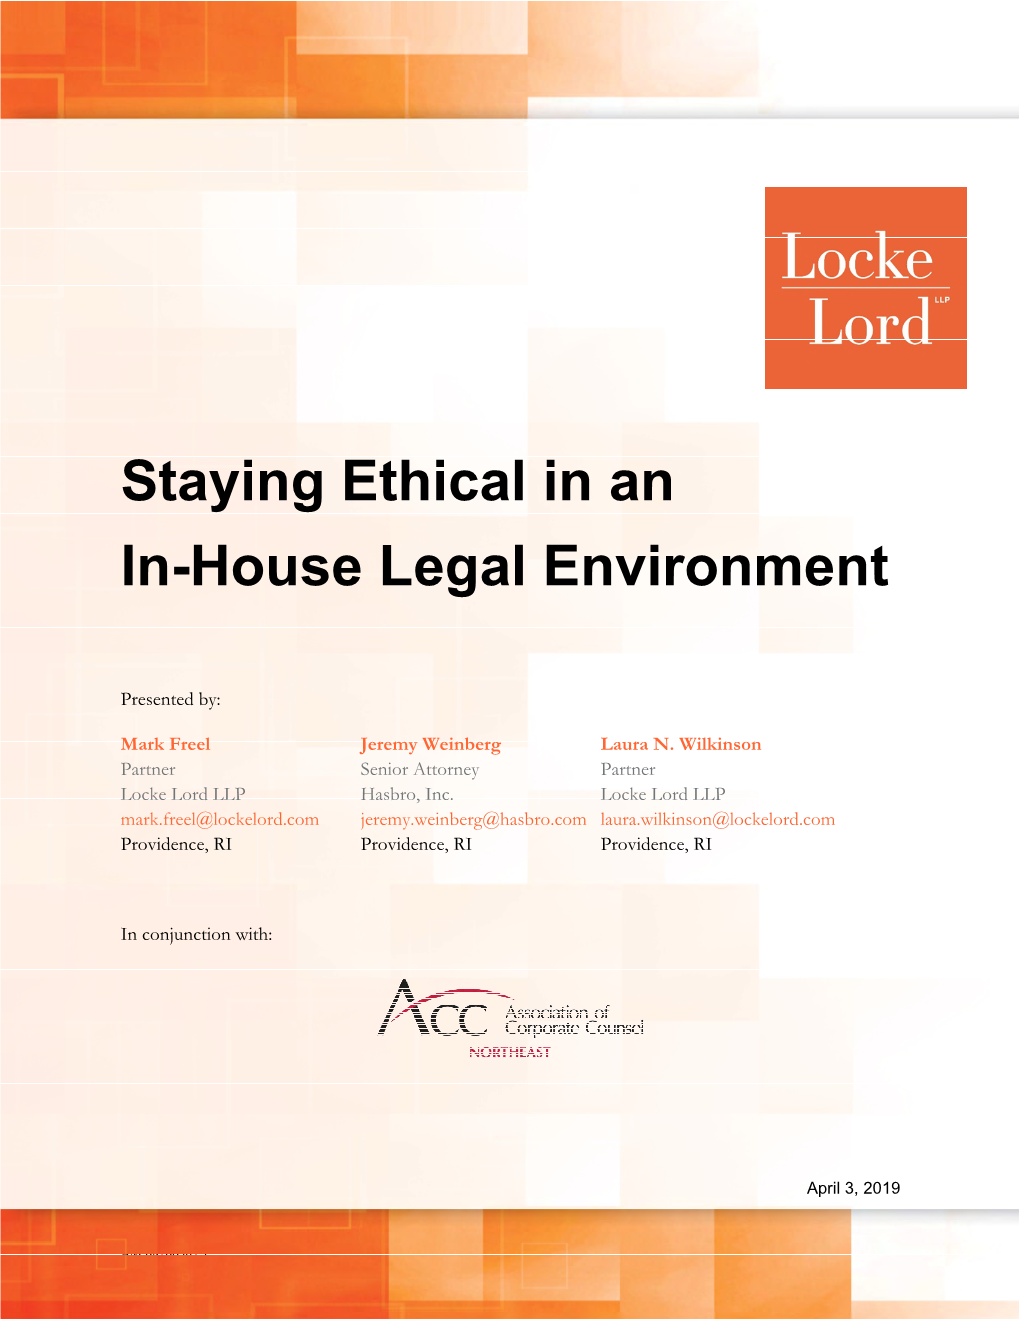 Staying Ethical in an In-House Legal Environment